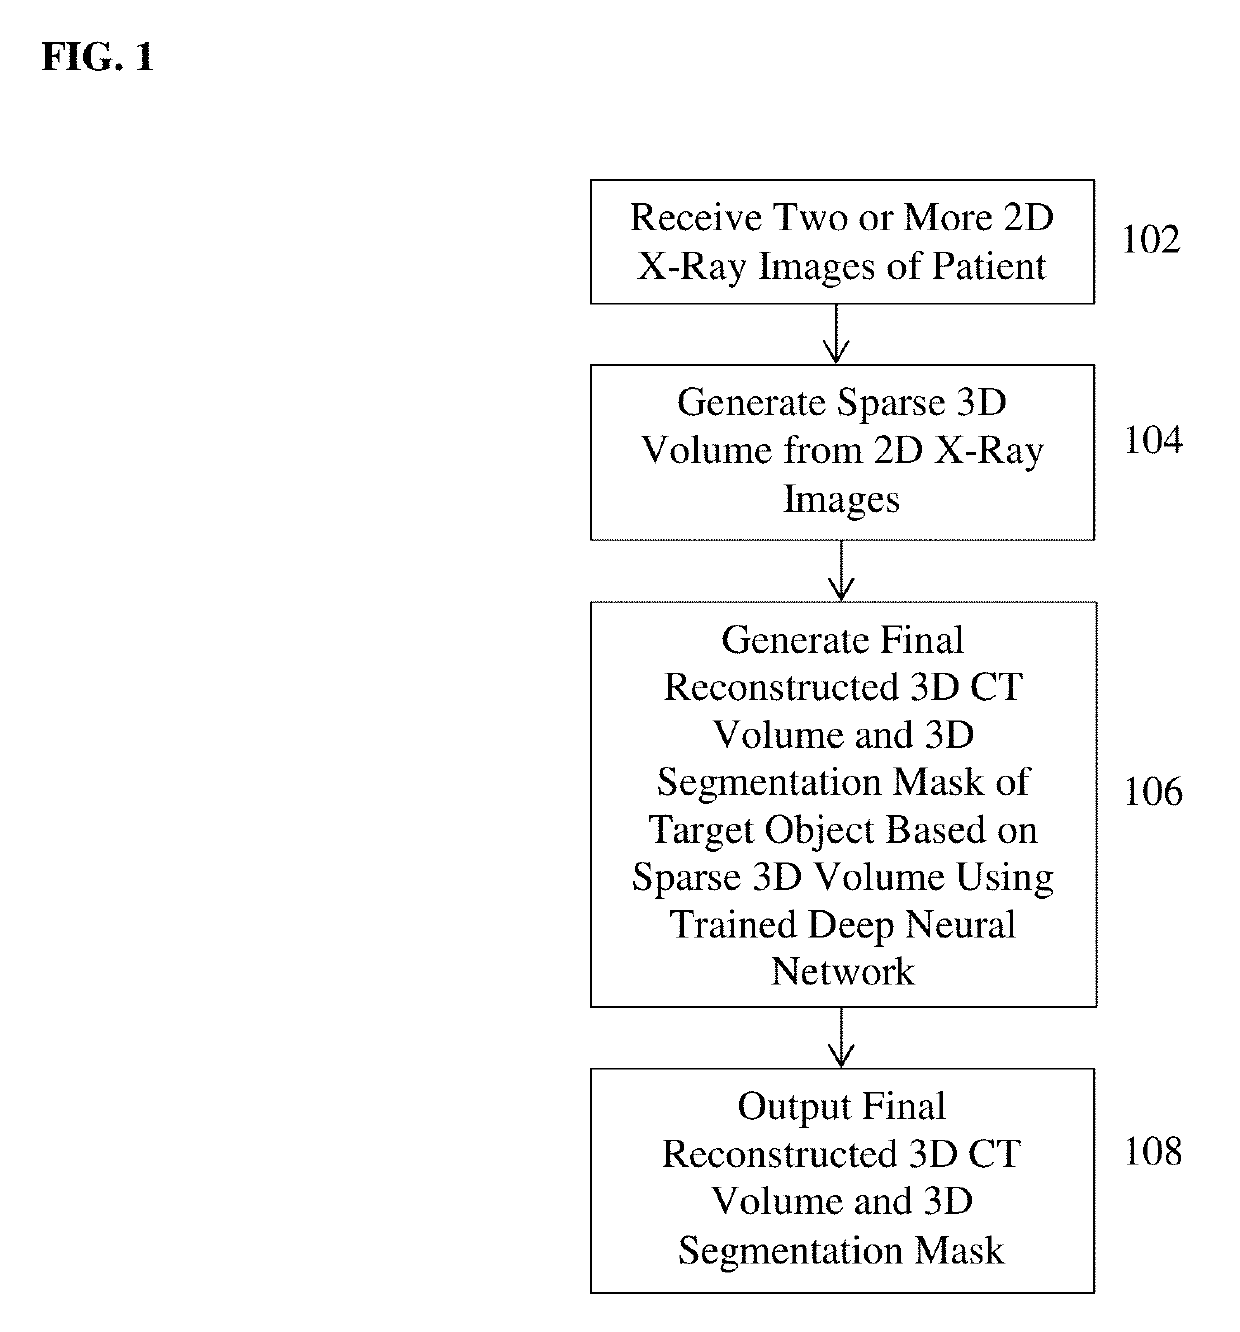 Method and System for 3D Reconstruction of X-ray CT Volume and Segmentation Mask from a Few X-ray Radiographs